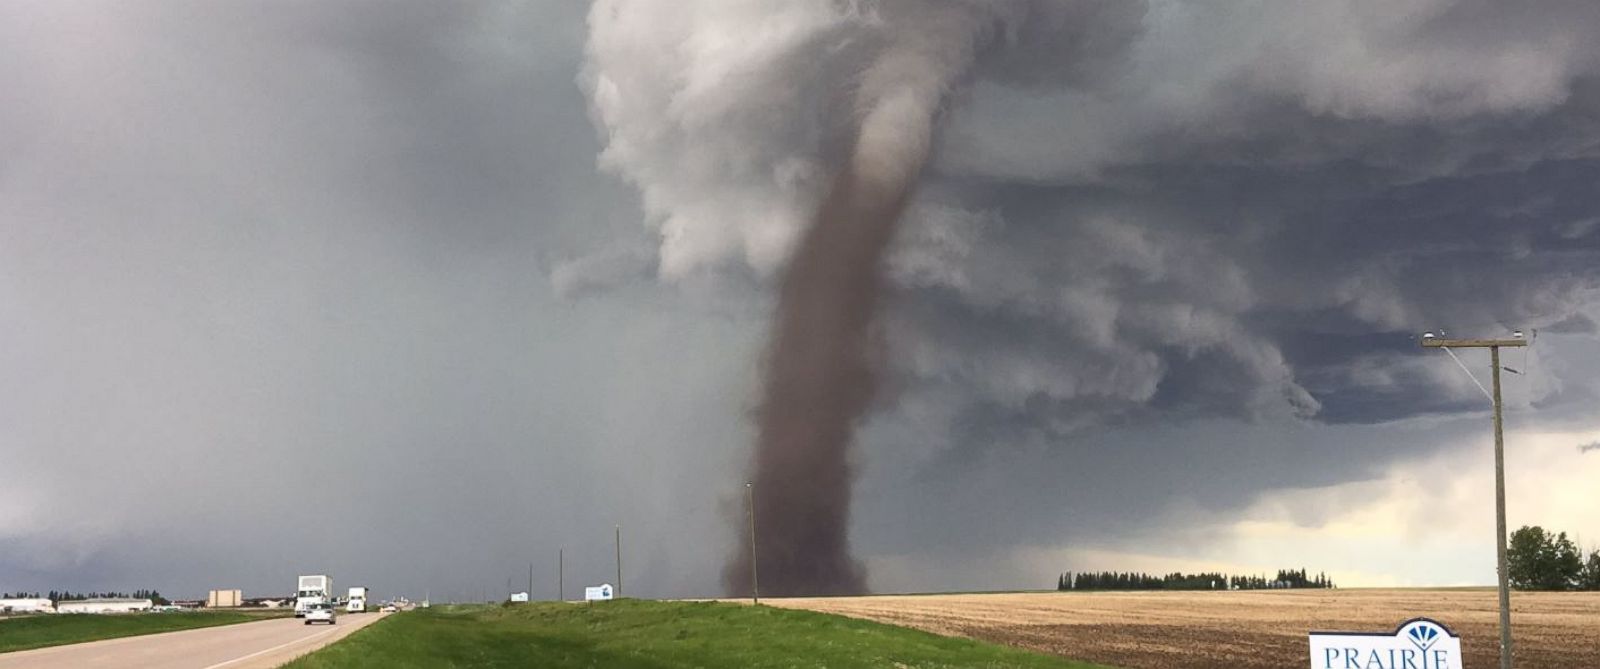 Tornado touches down near highway in Canada in dramatic video ABC News